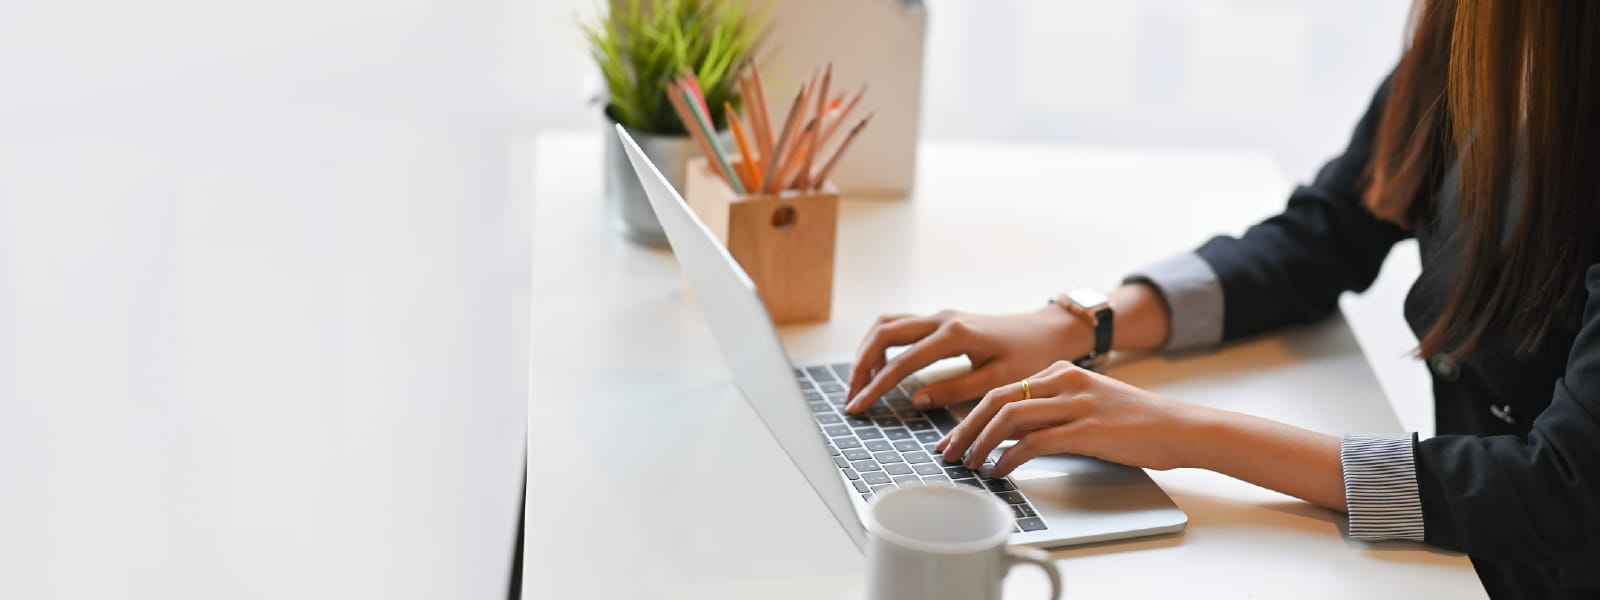 Cropped image of creative woman hands typing on a computer laptop - Header